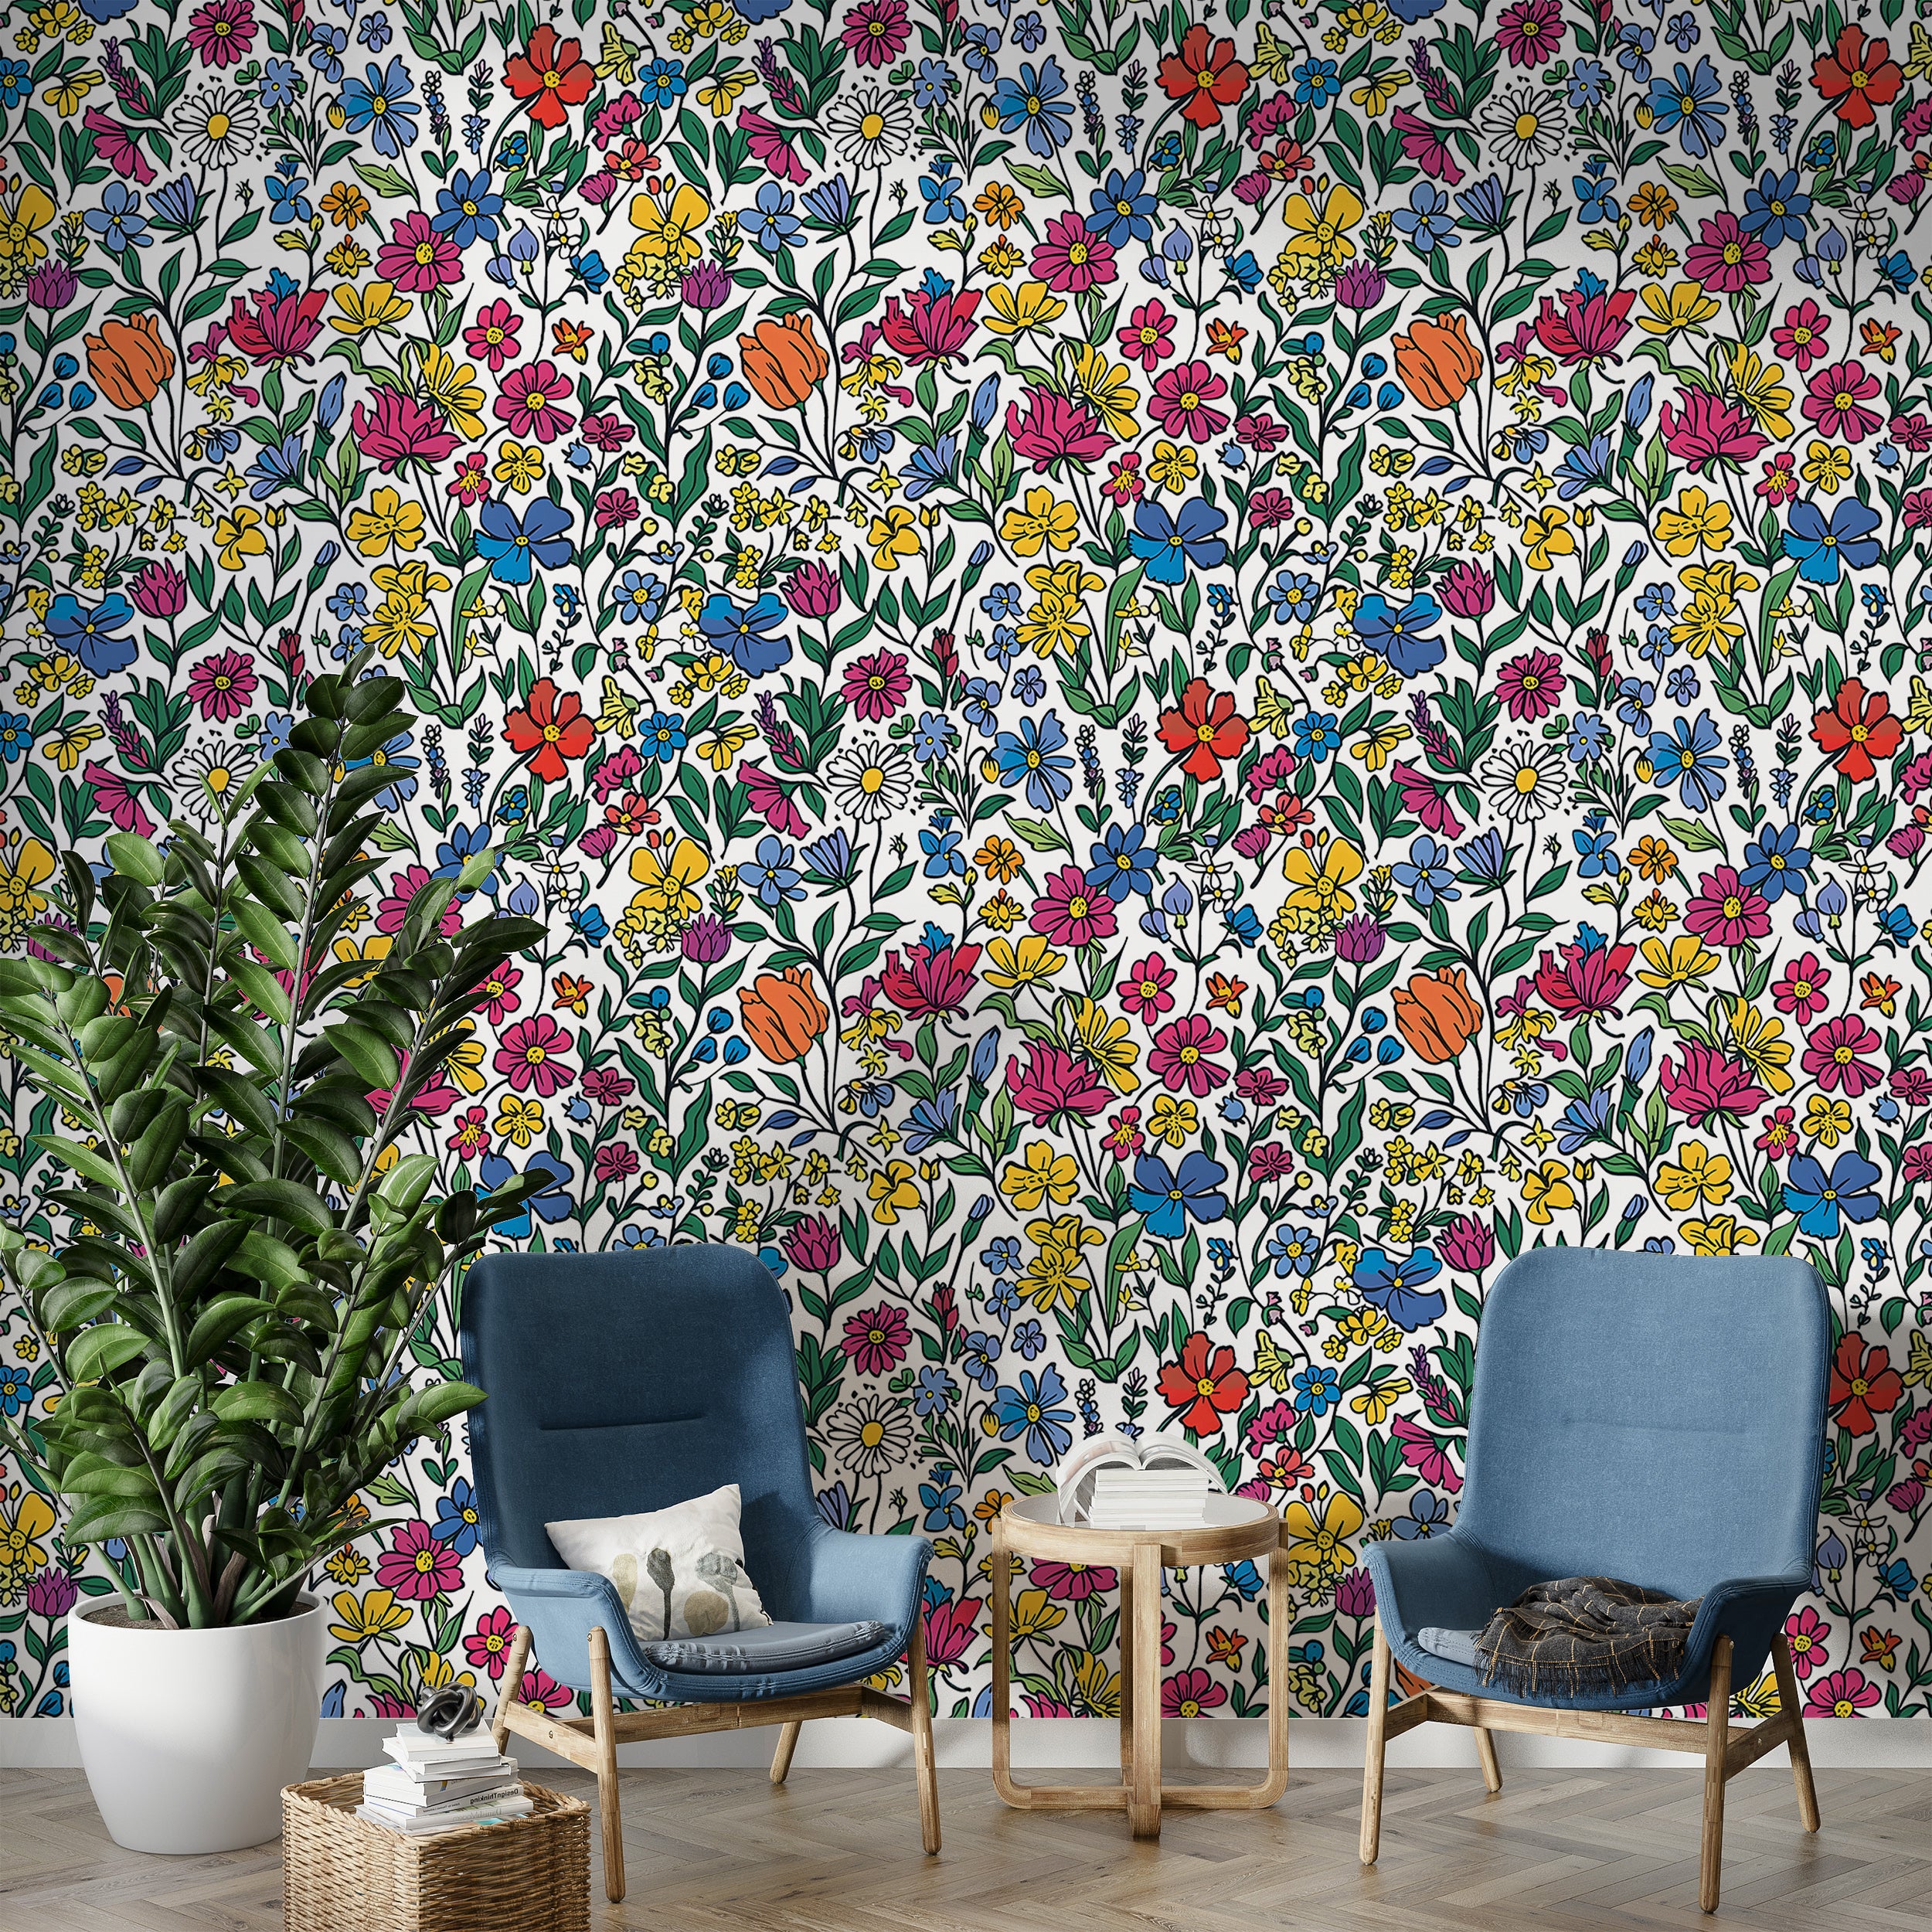 Colorful Floral Wallpaper, Watercolor Peel and Stick Meadow Flowers Wall Decal, Removable Cartoon Style Wild Flower Pattern Wallpaper